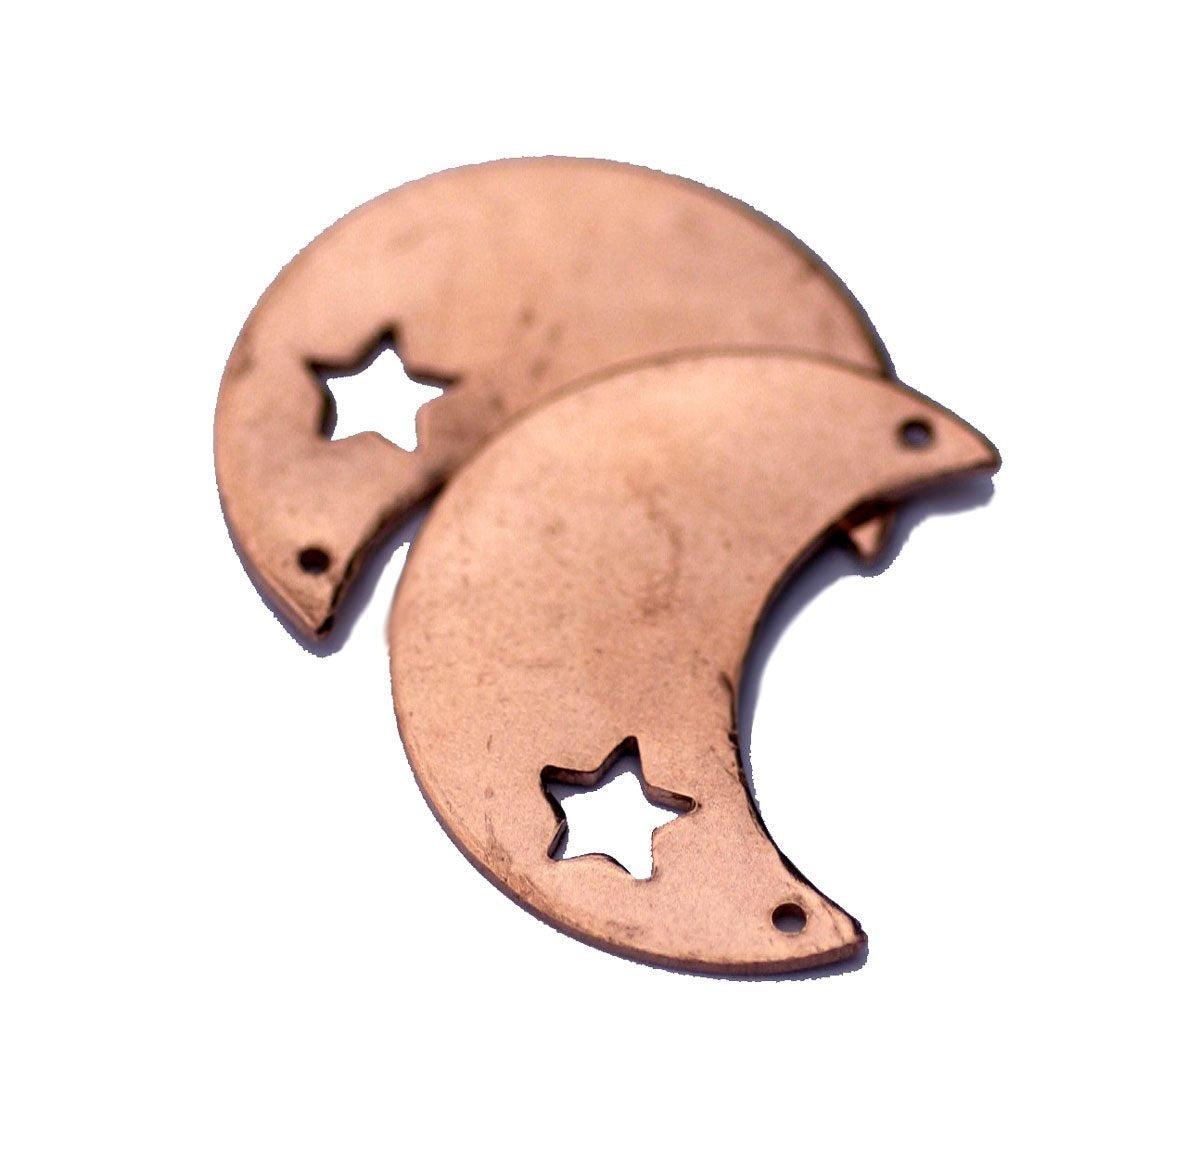 Copper, Brass, Bronze or Nickel Silver Moon with Star with holes - Blanks Cutout for Enameling Stamping Texturing 3/4 inch (DCH) - 4 pieces